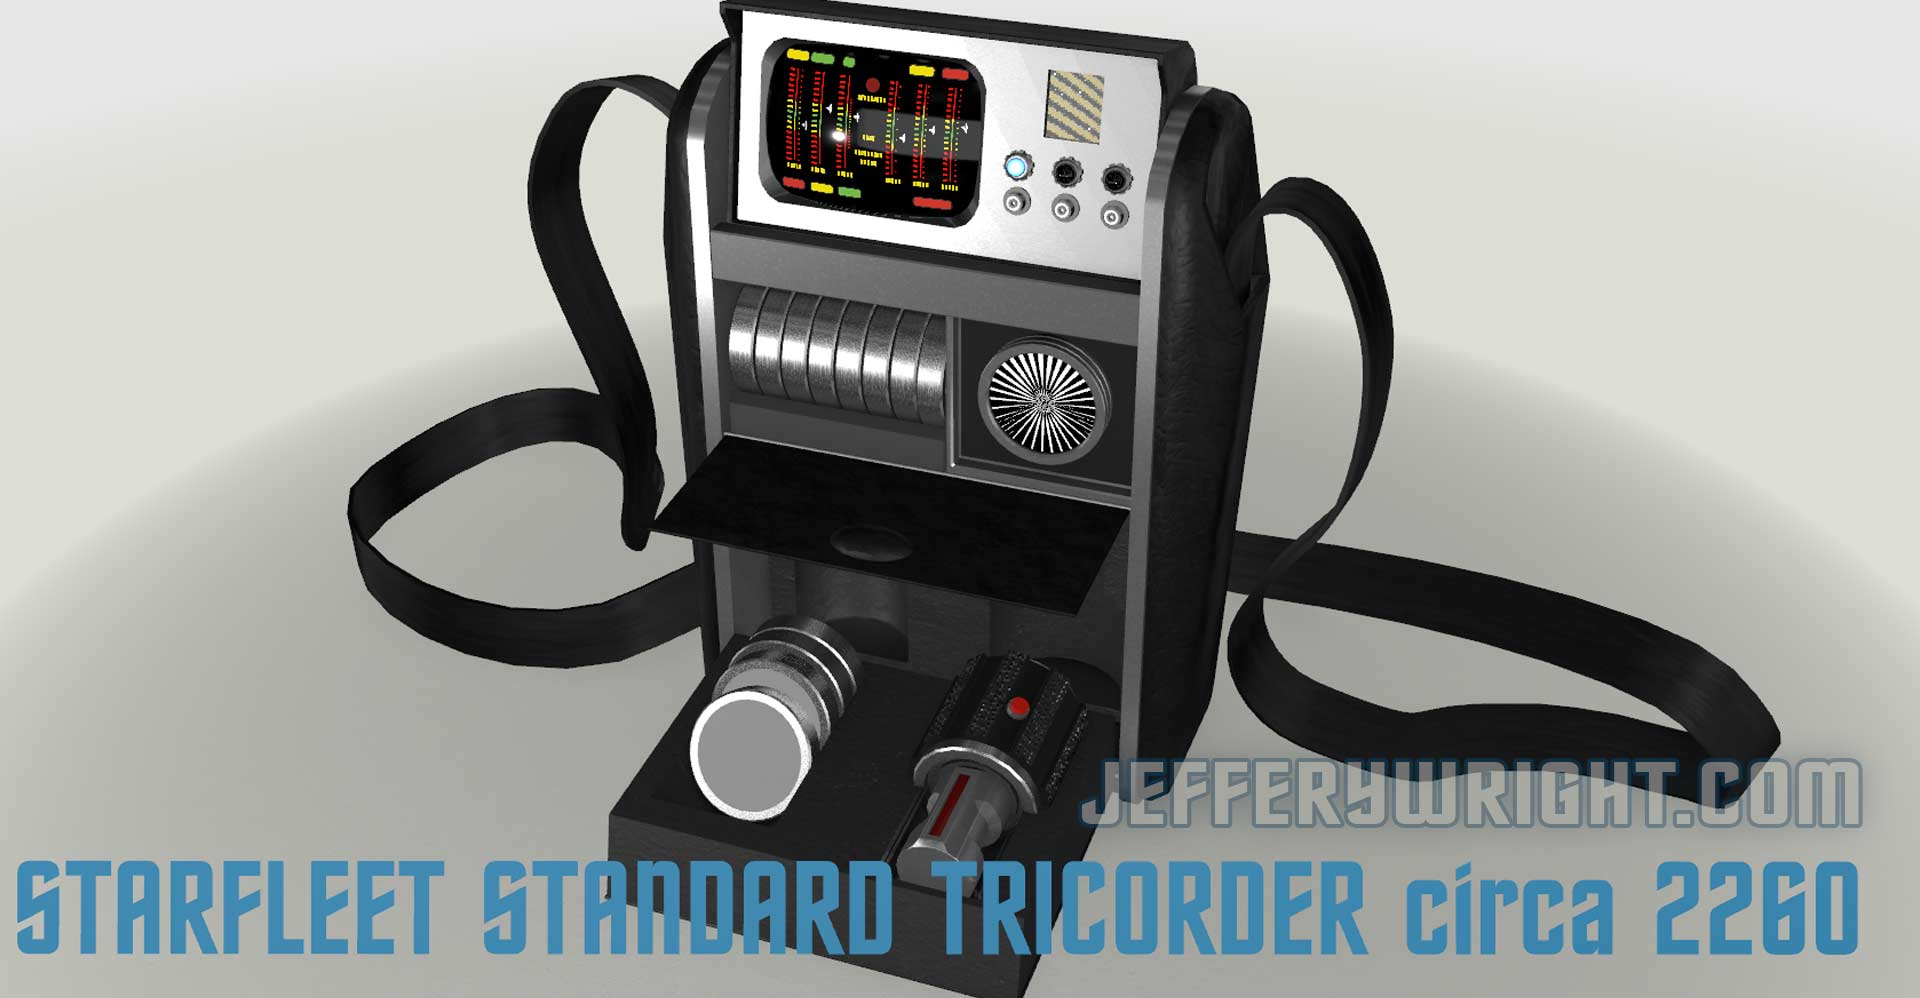 click to launch Interactive 3D Star Trek TOS Tricorder application